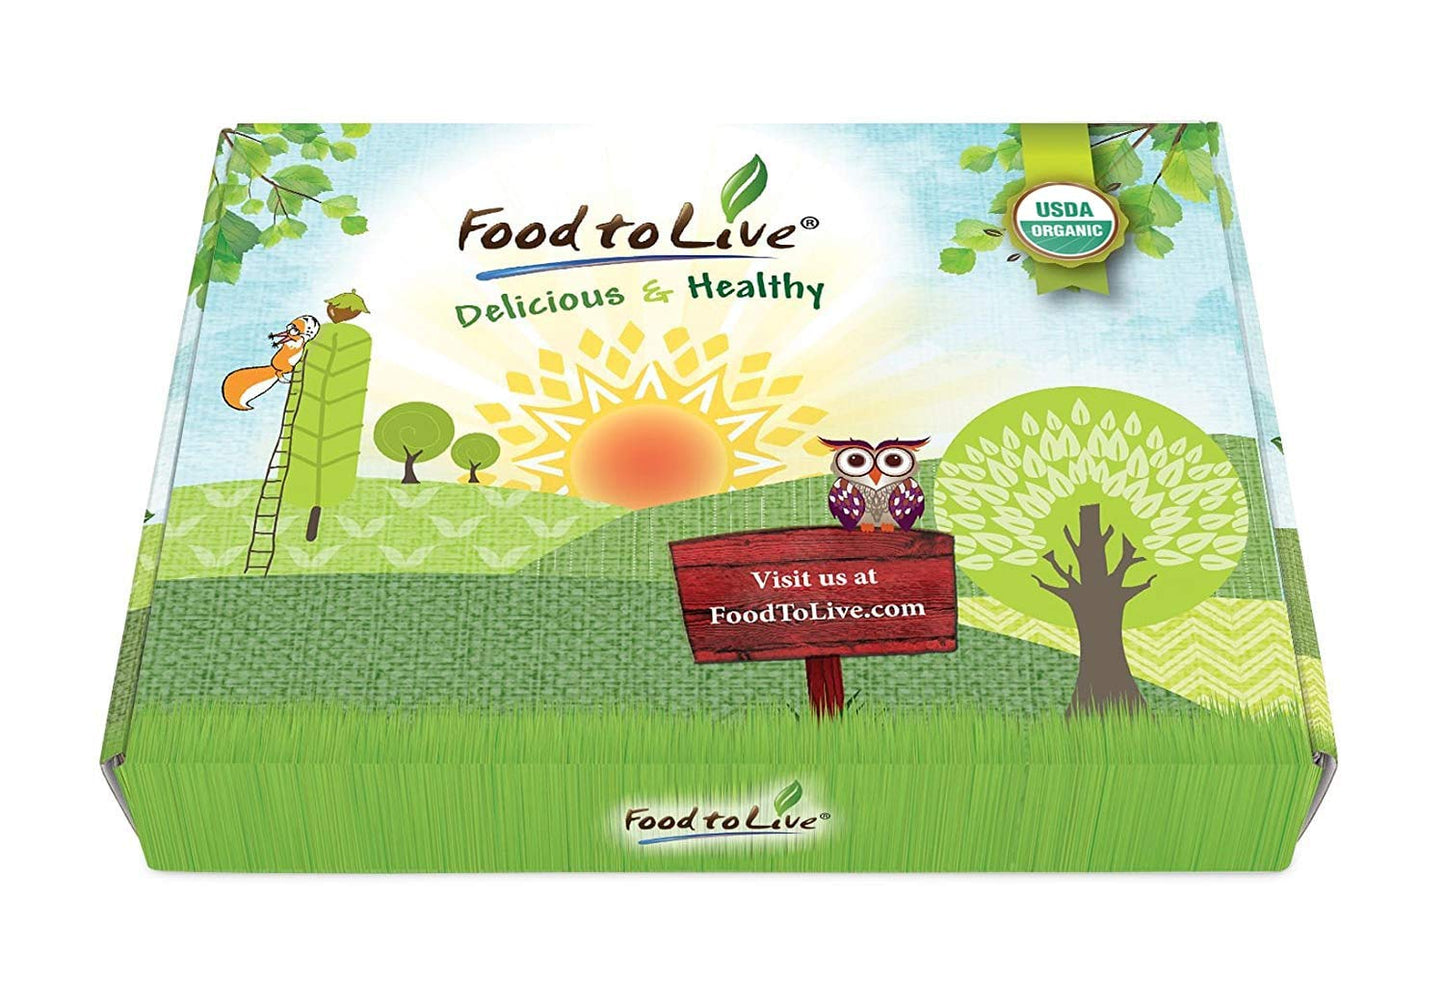 Organic Sprouting Beans, Peas, and Lentils in a Gift Box - Mung Beans, Adzuki Beans, Red Lentils, Chickpeas, Green Peas - by Food to Live